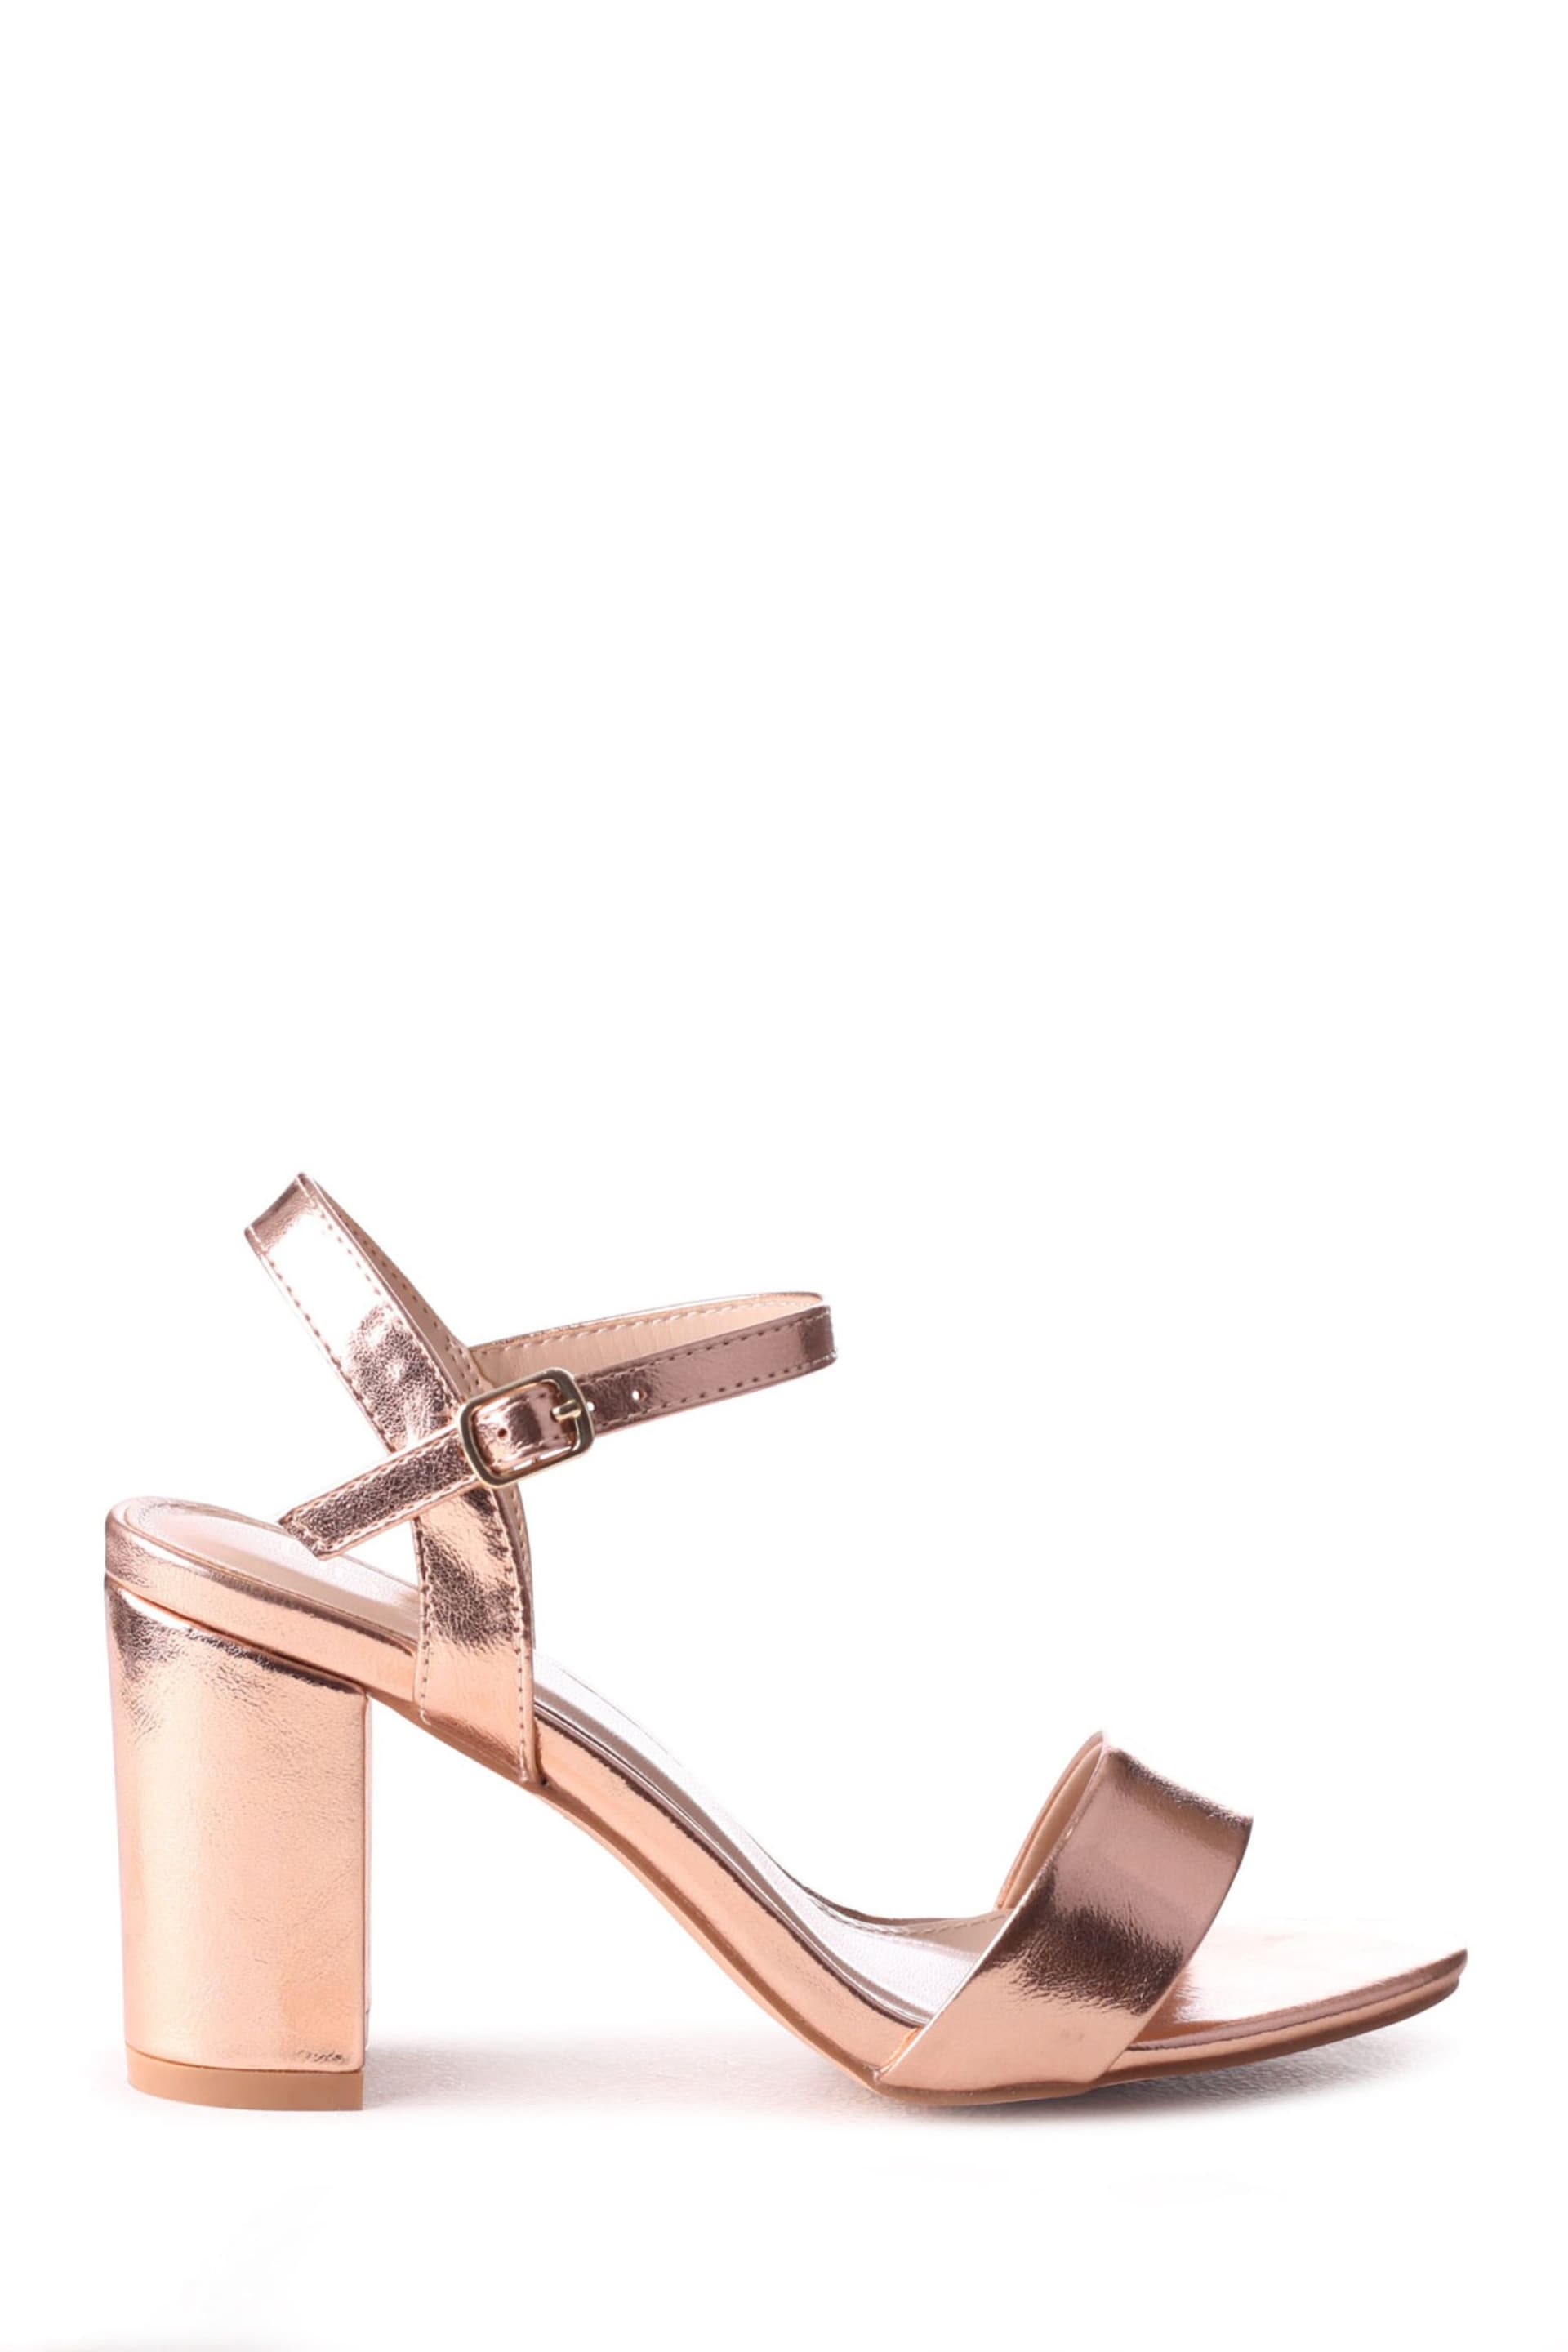 Linzi Rose Gold Skyline Open Back Barely There Block Heels - Image 2 of 4